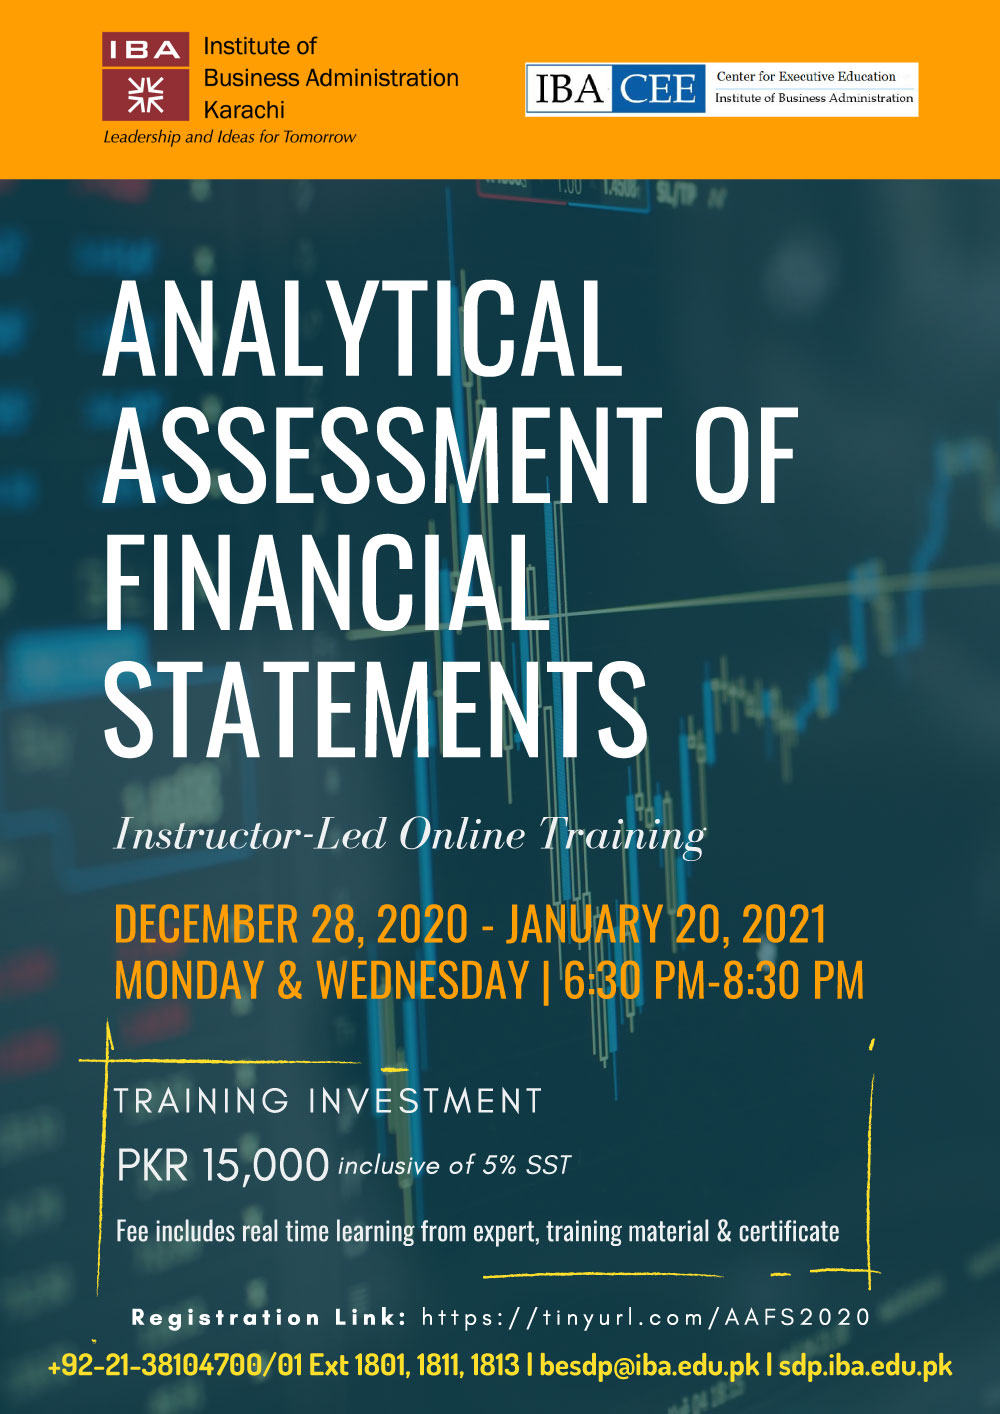 Analytical Assessment of Financial Statements